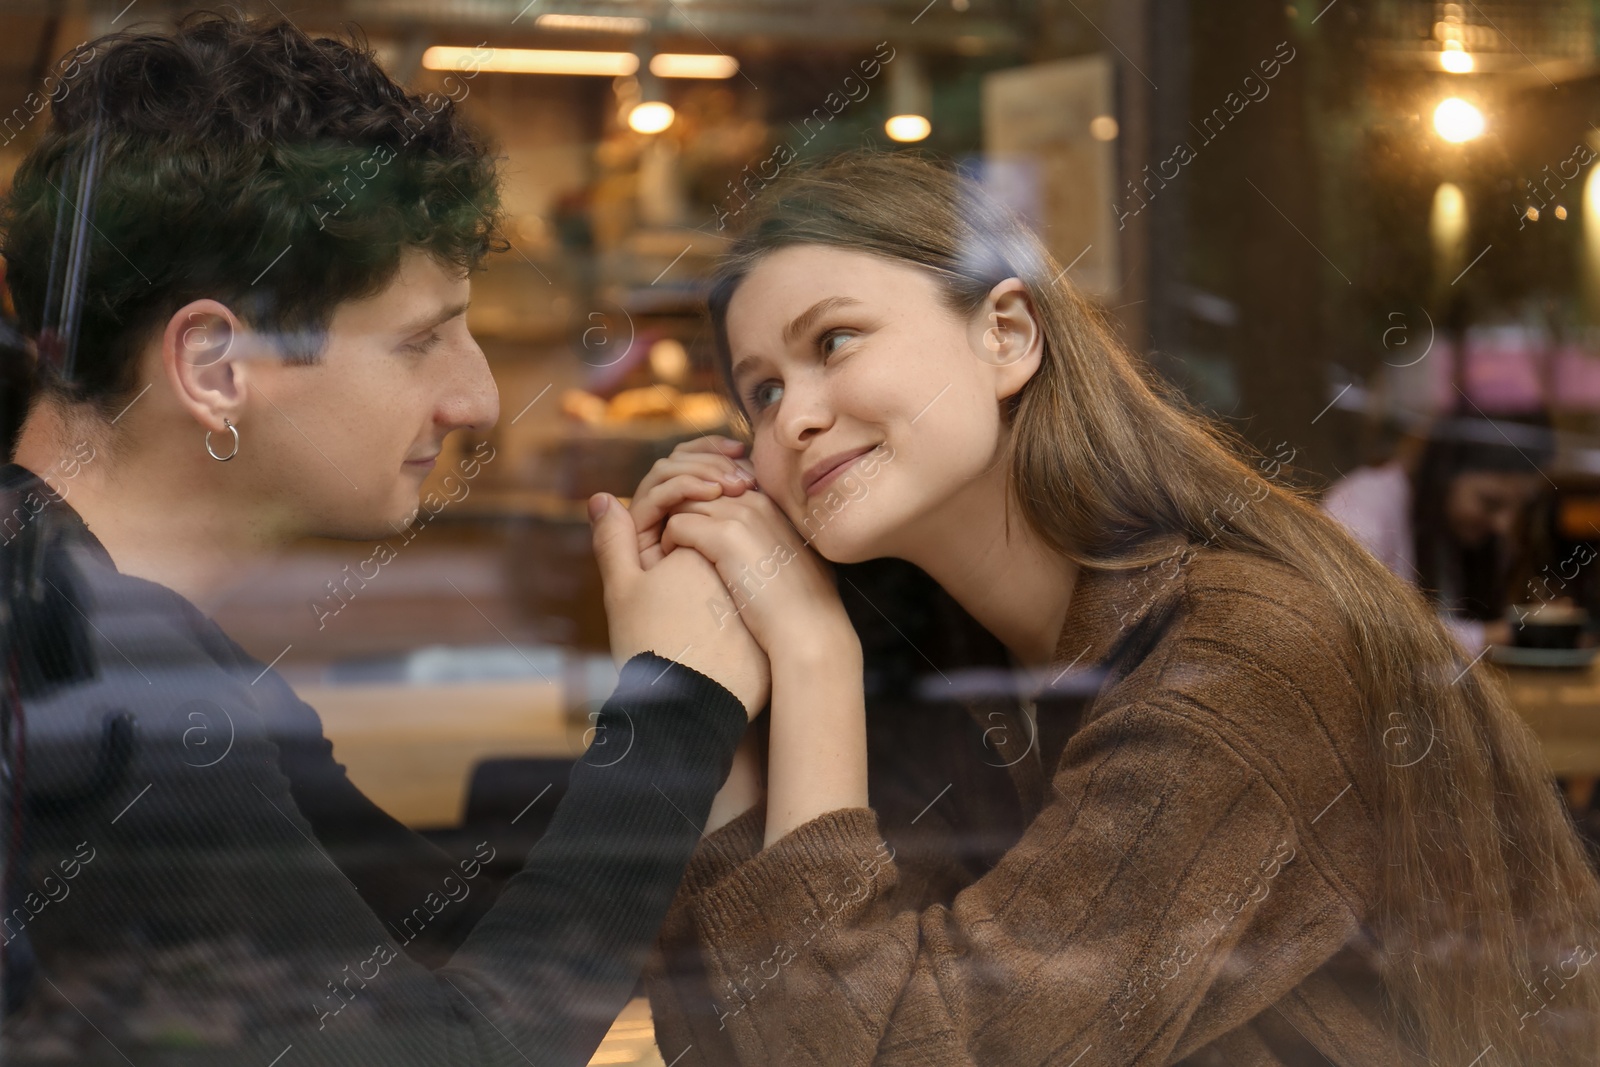 Photo of International dating. Lovely young couple spending time together in cafe, view through glass window